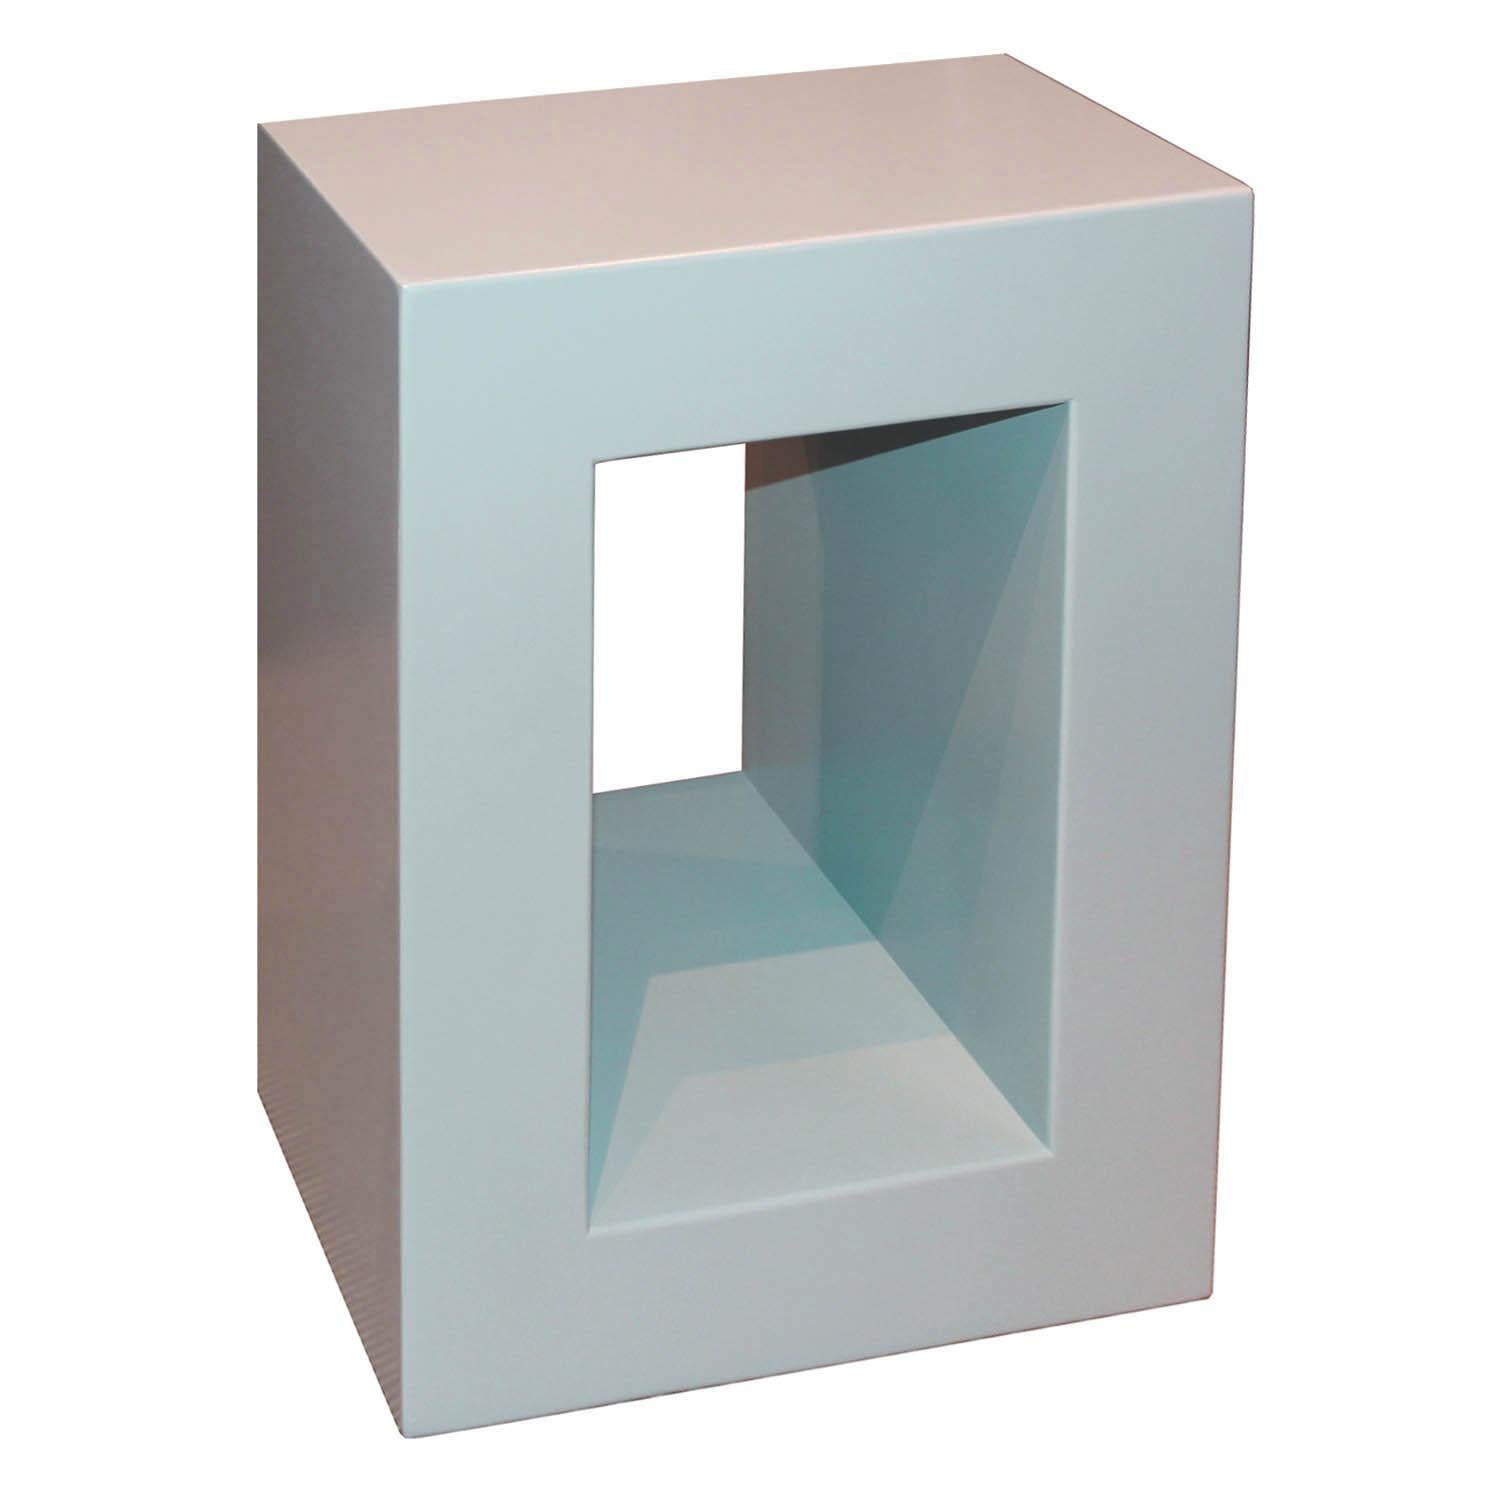 Versatile powder blue lacquer open side table. Use as a side or coffee table horizontally or vertically.